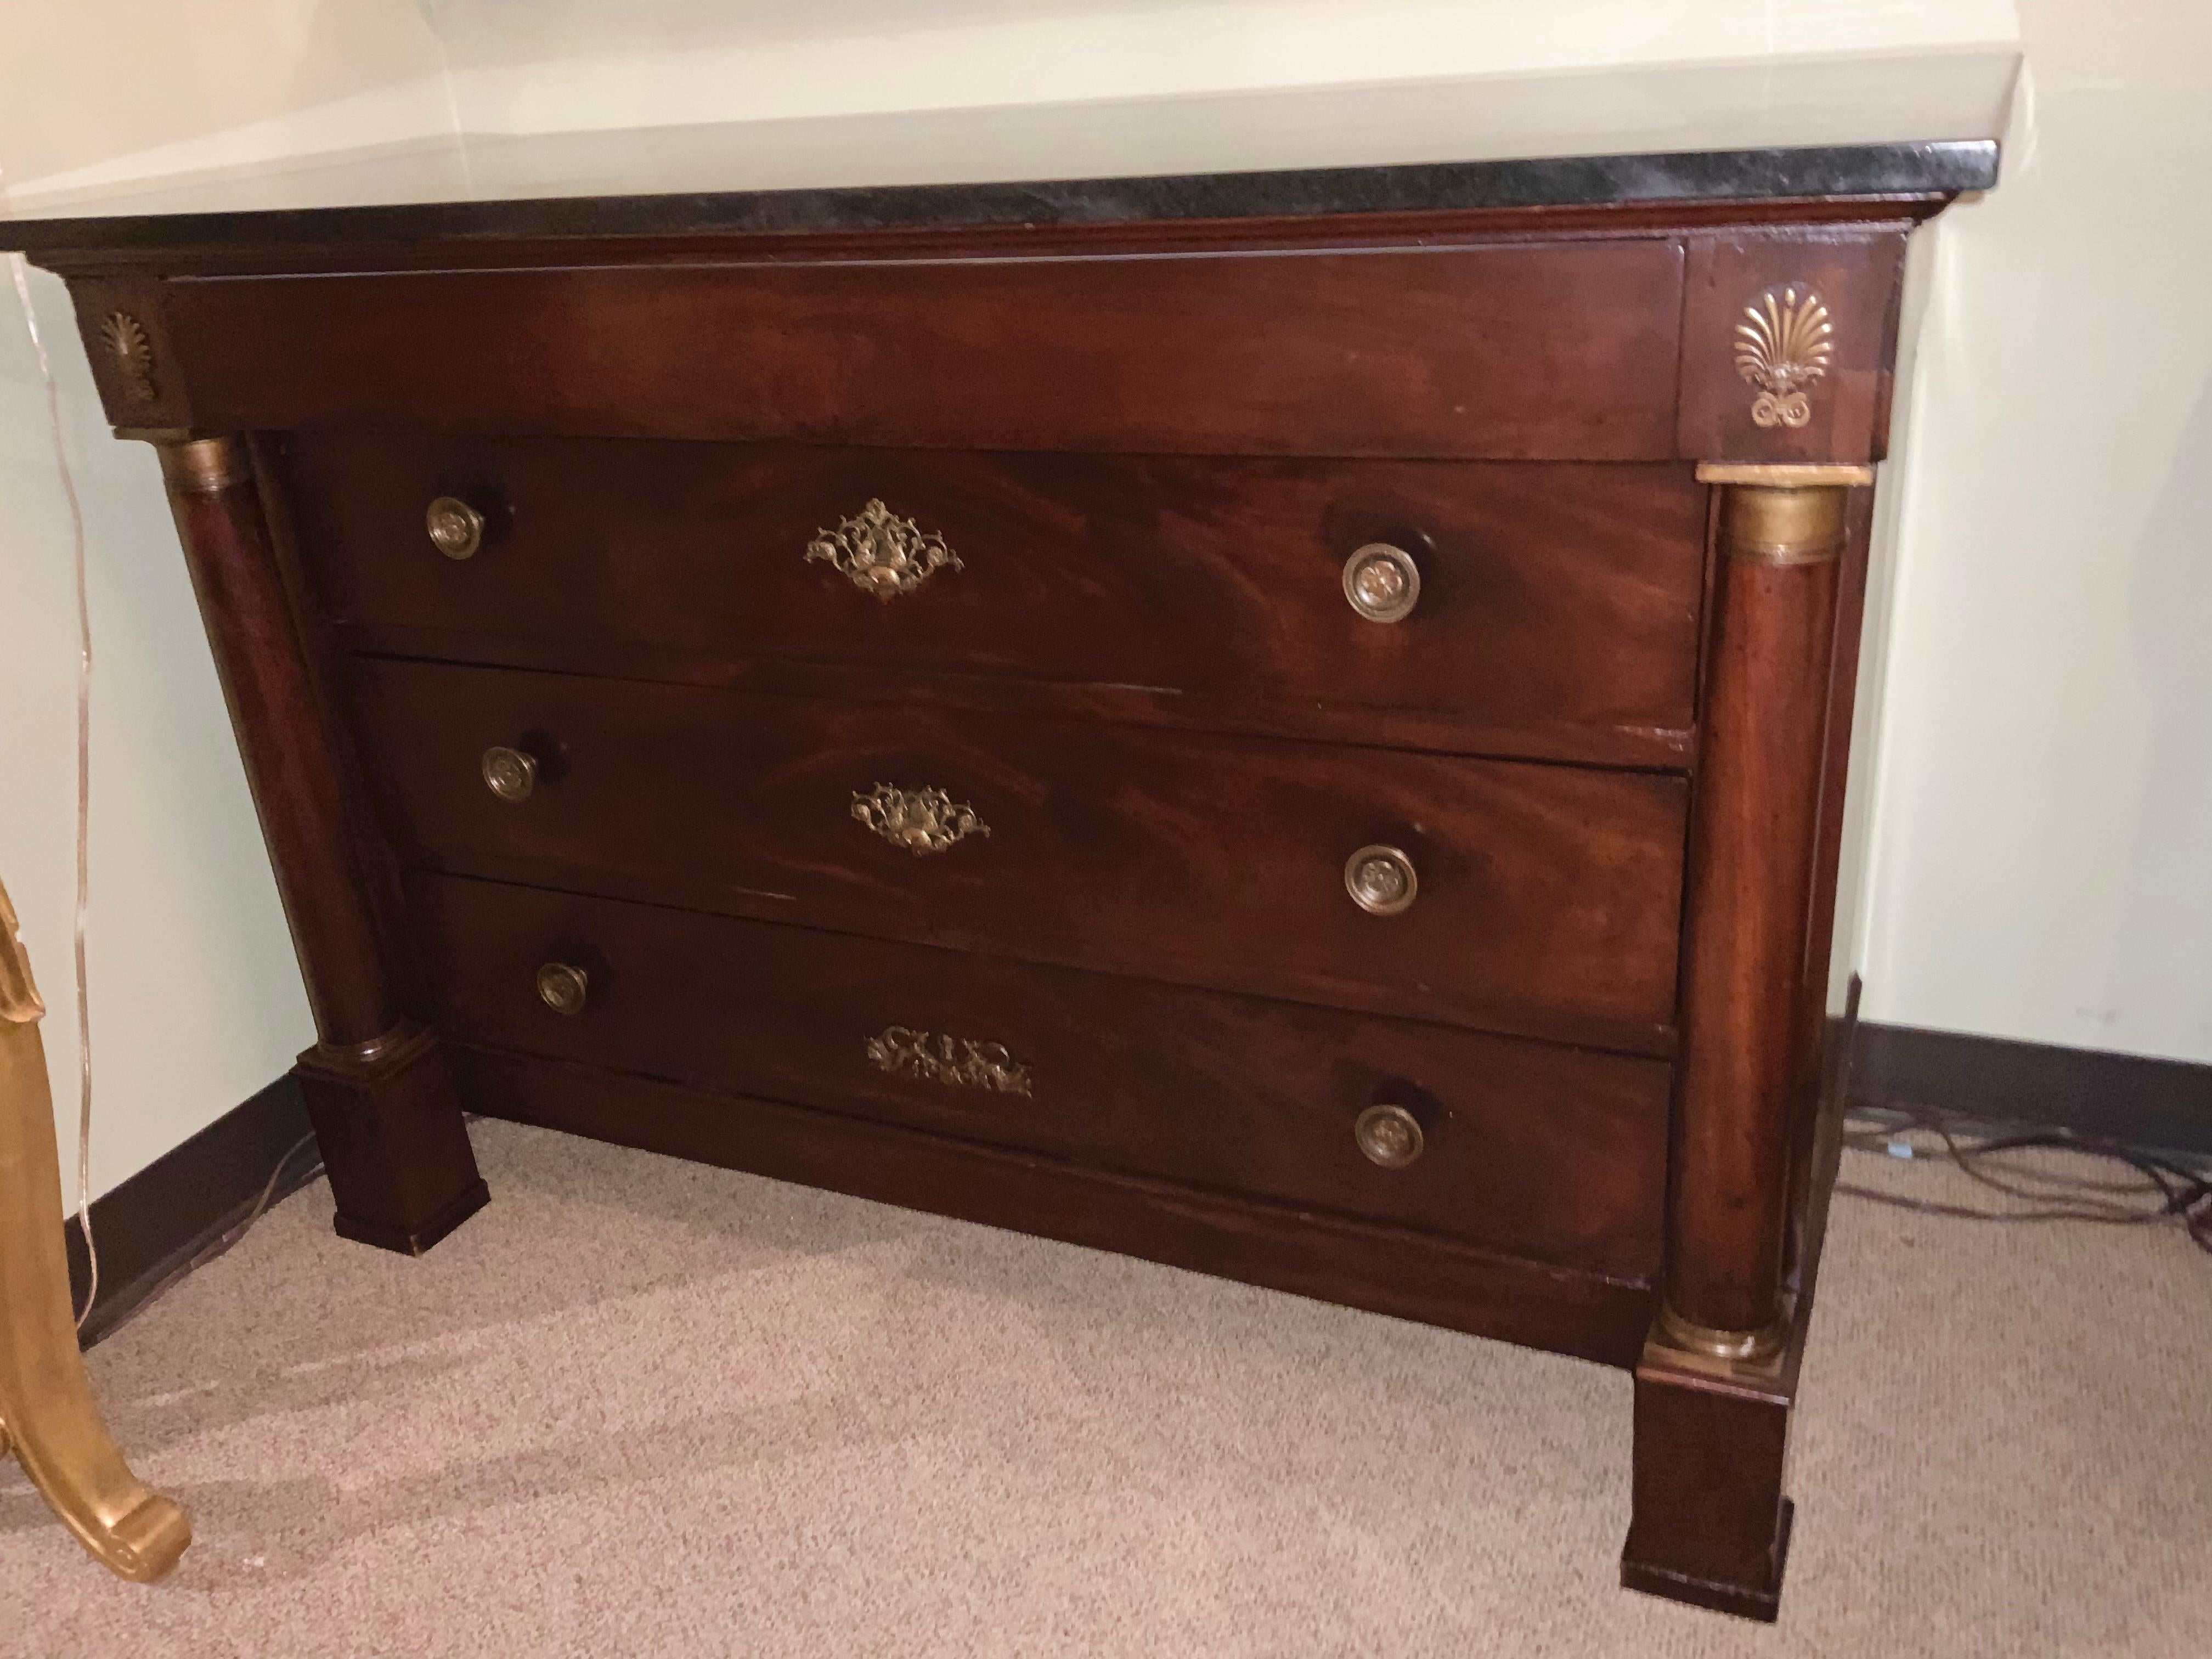 This is a handsome chest of drawers having four drawers that
Draw easily. A column flanks each side and is accented with
Original bronze dore mounts. The drawers are dove tailed and
The construction is very good. A squared foot is evident.